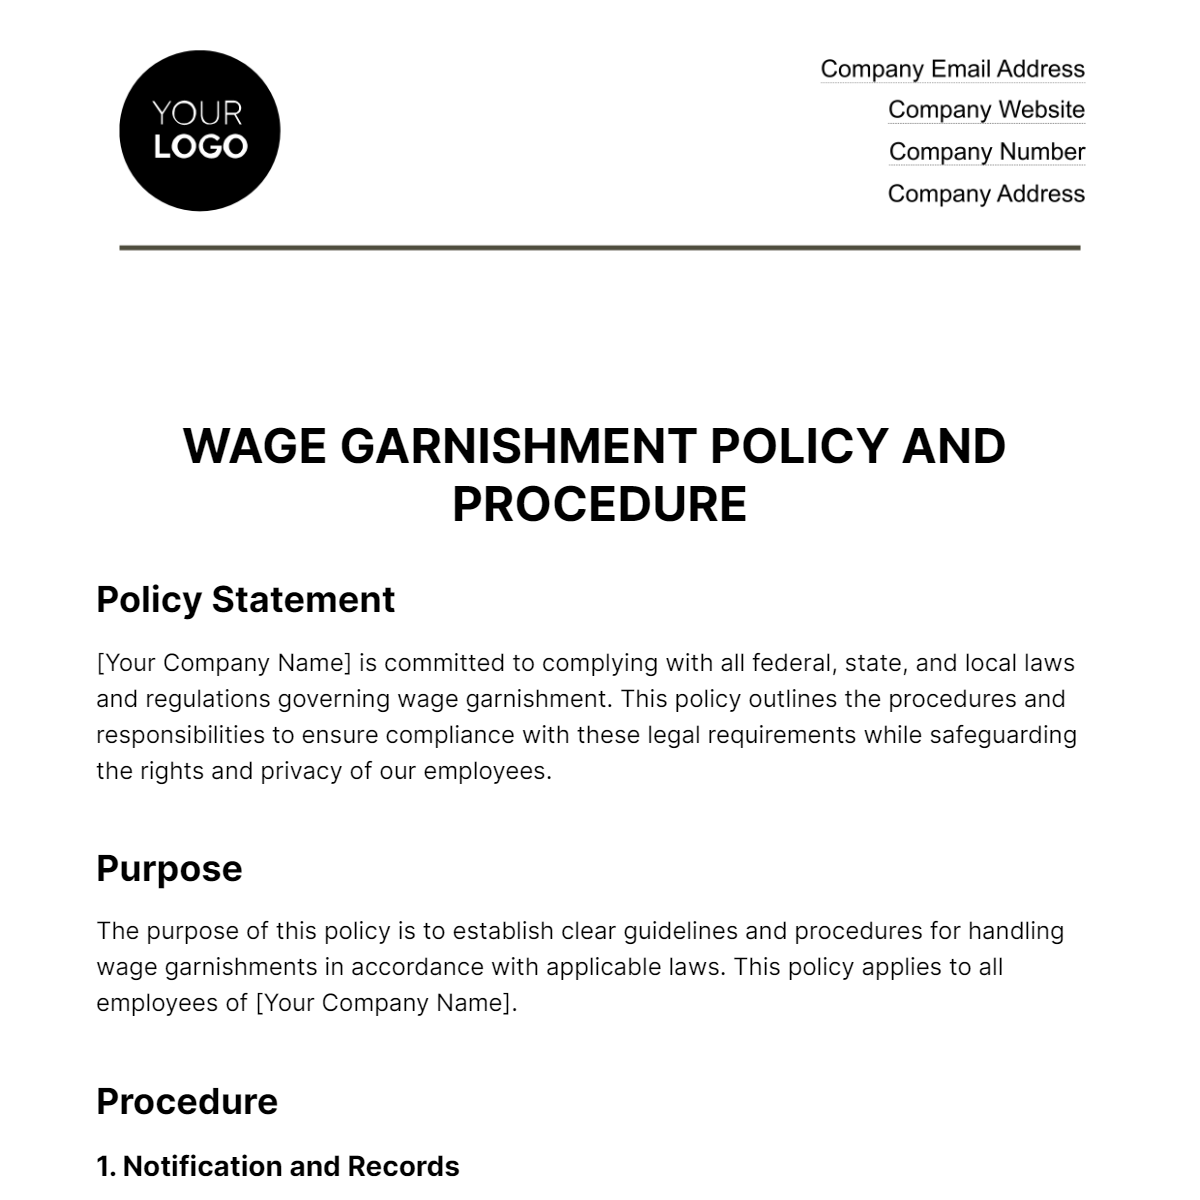 Wage Garnishment Policy and Procedure HR Template